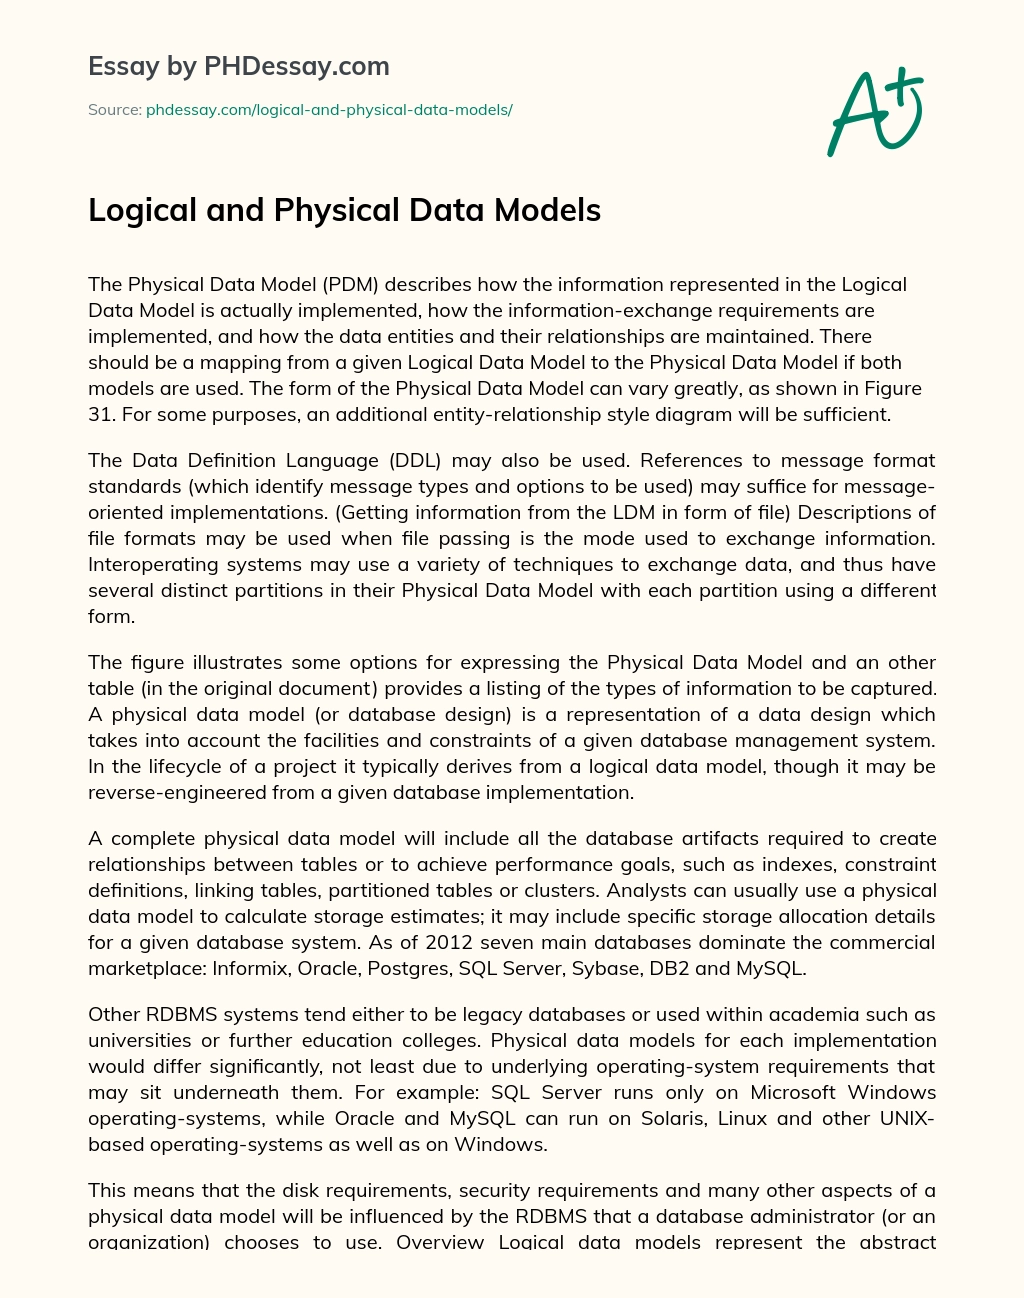 Logical and Physical Data Models essay